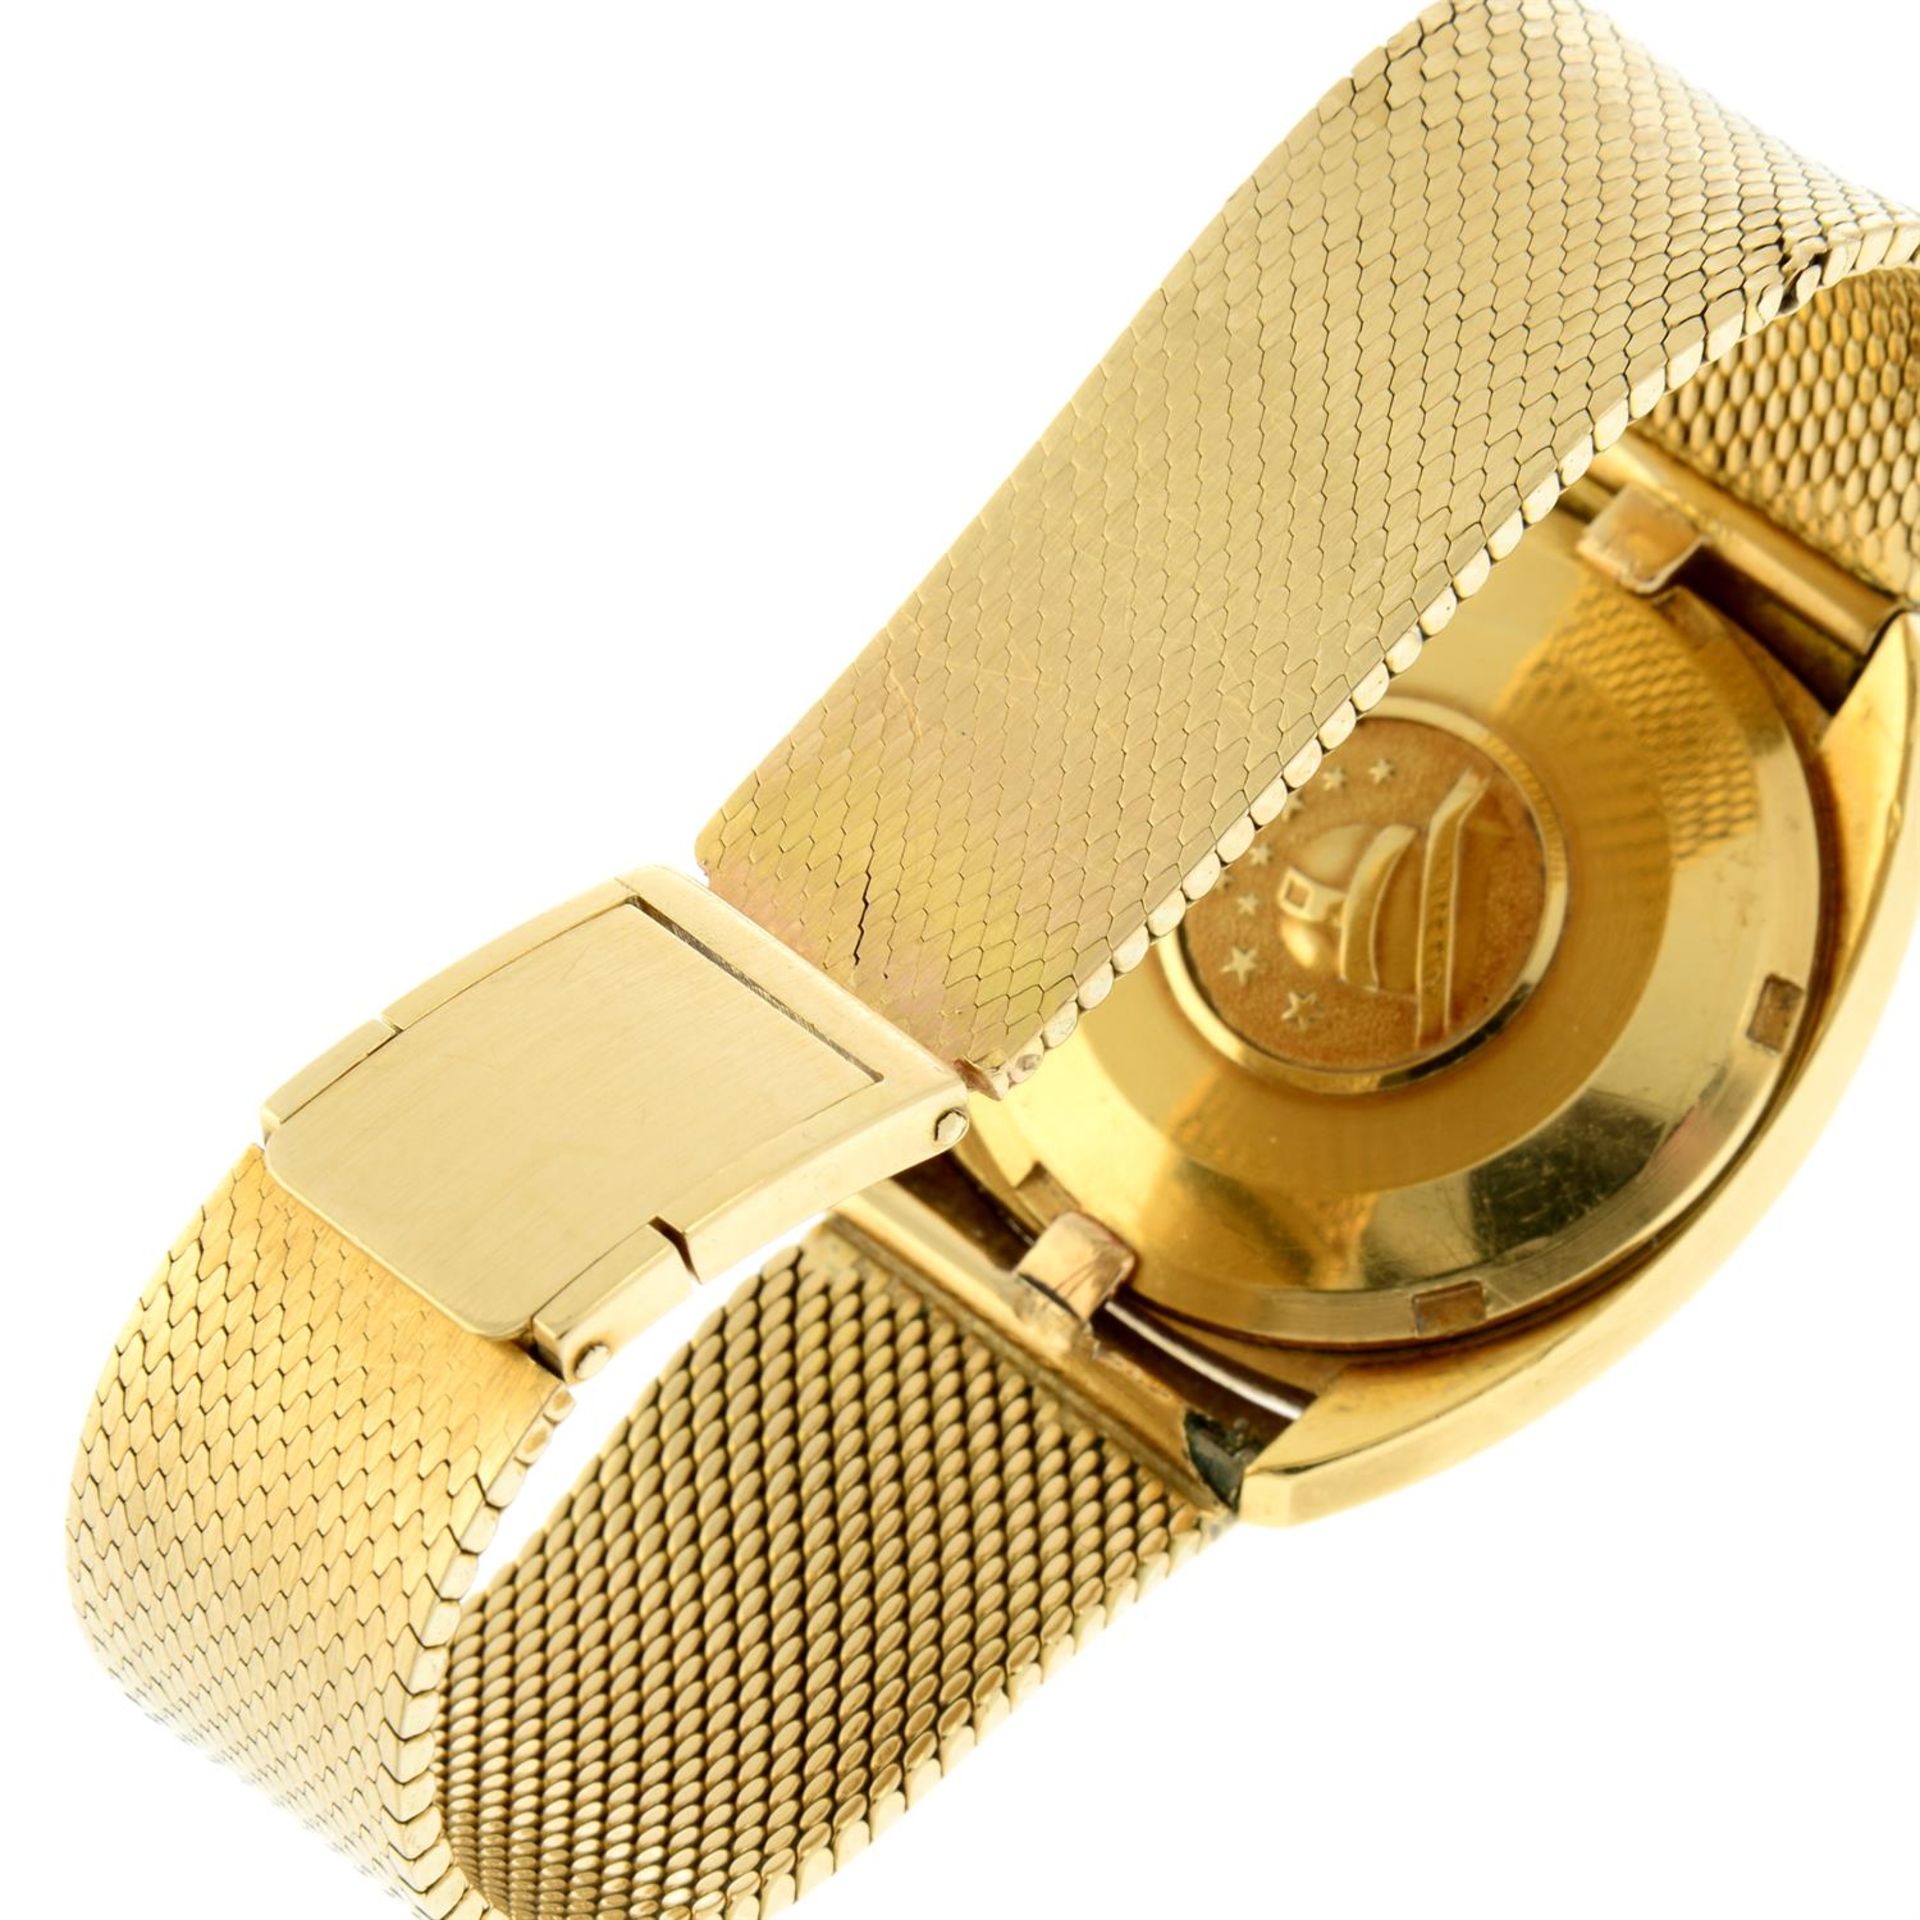 OMEGA - a yellow metal Constellation bracelet watch, 34mm. - Image 2 of 6